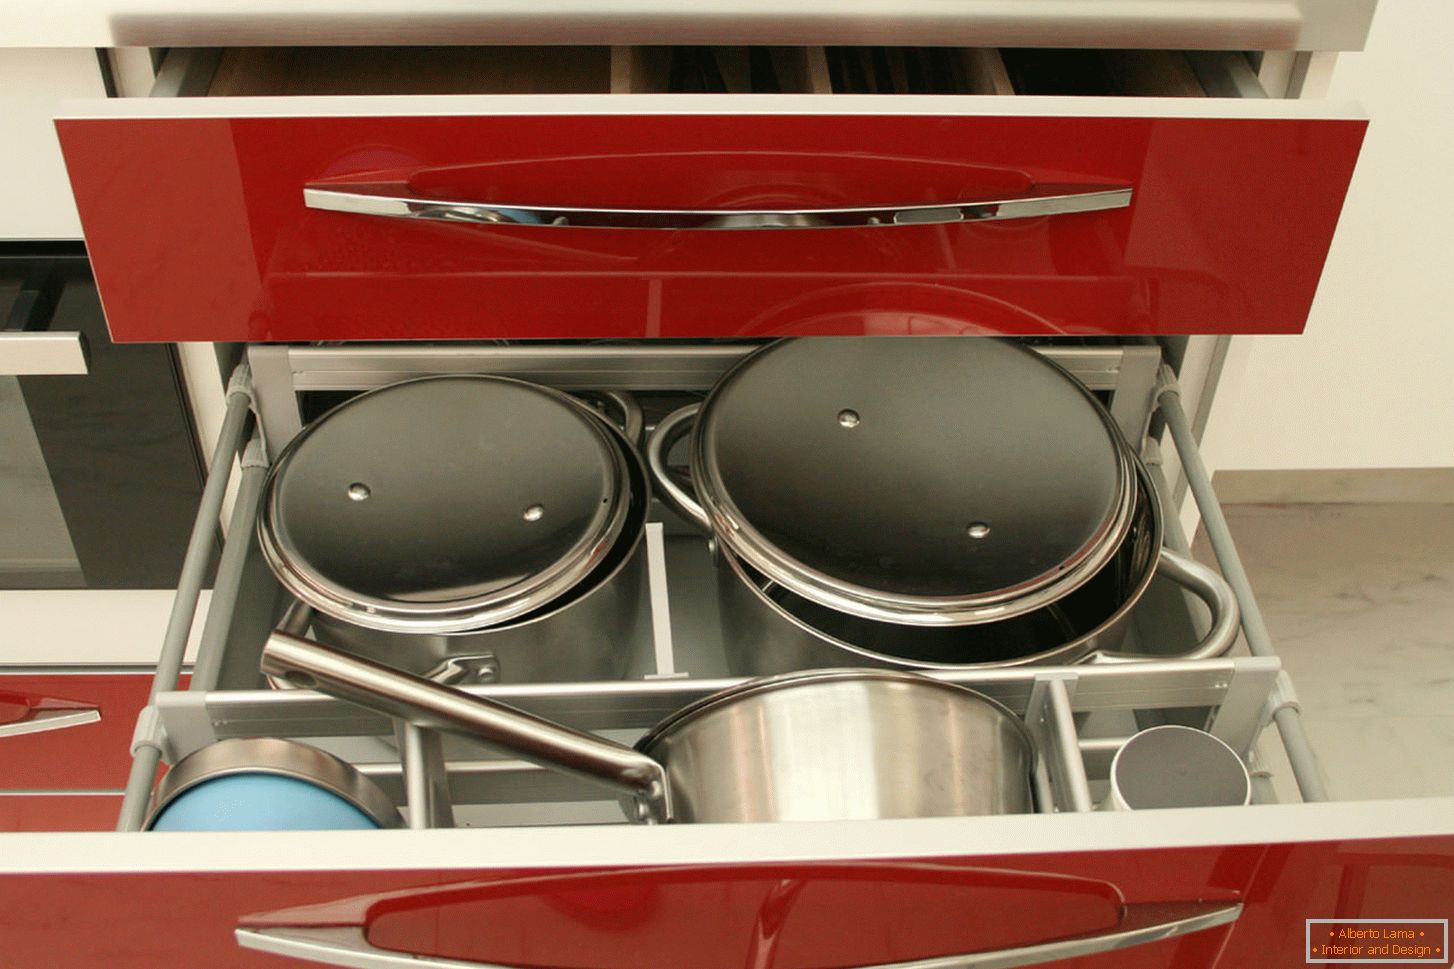 Cabinet for storing dishes